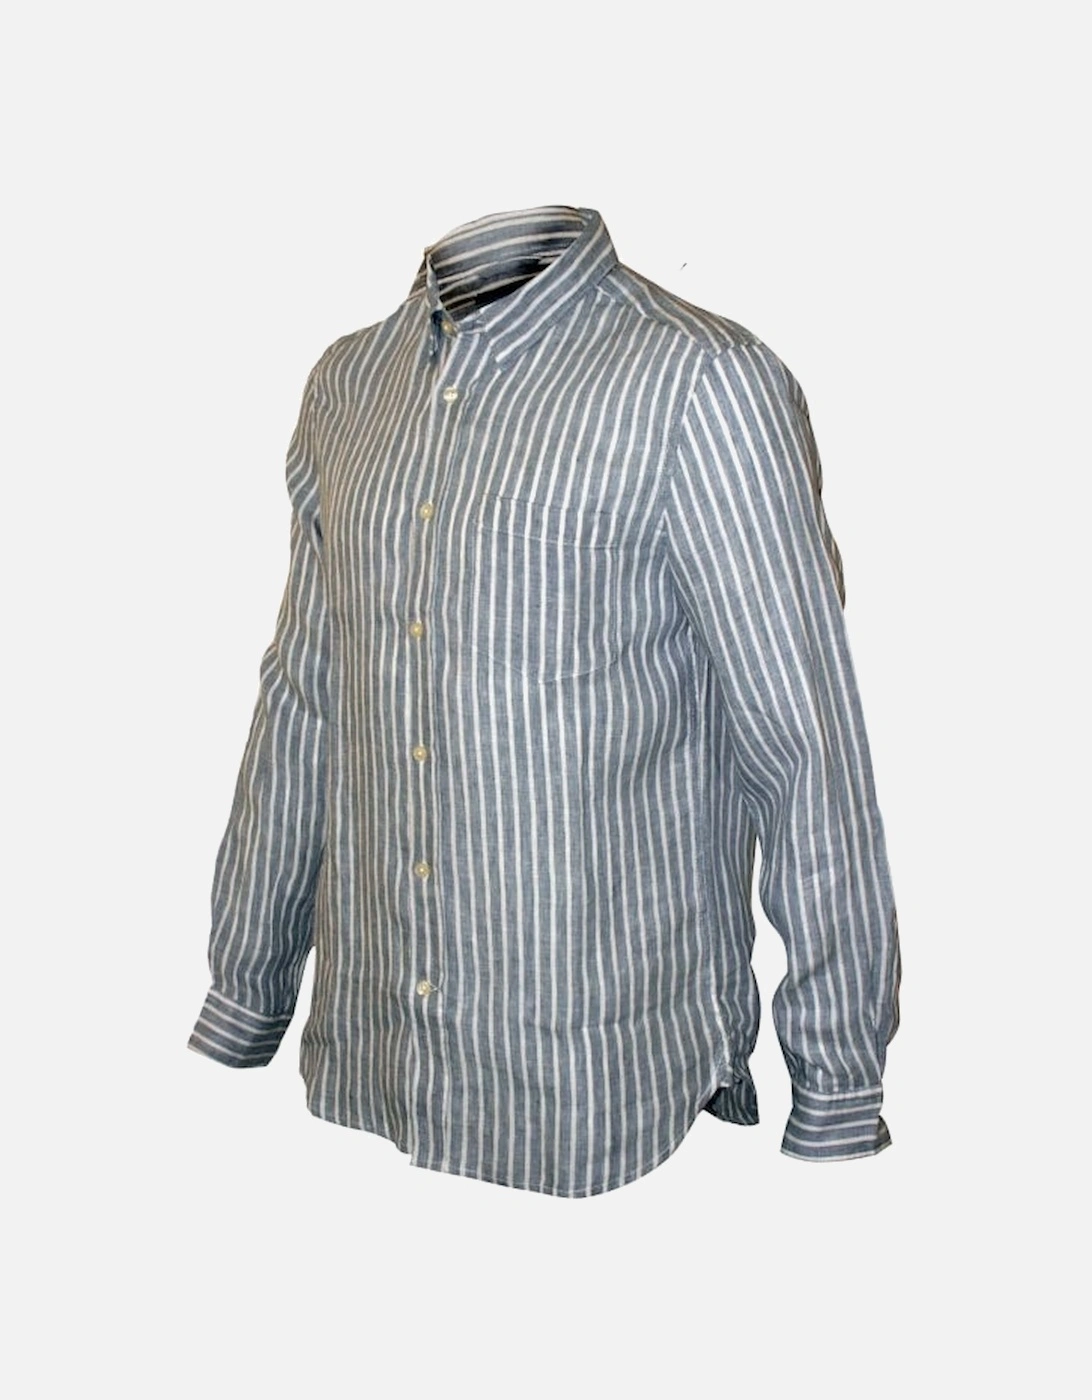 Striped Relaxed-Fit Linen Shirt, Grey/White